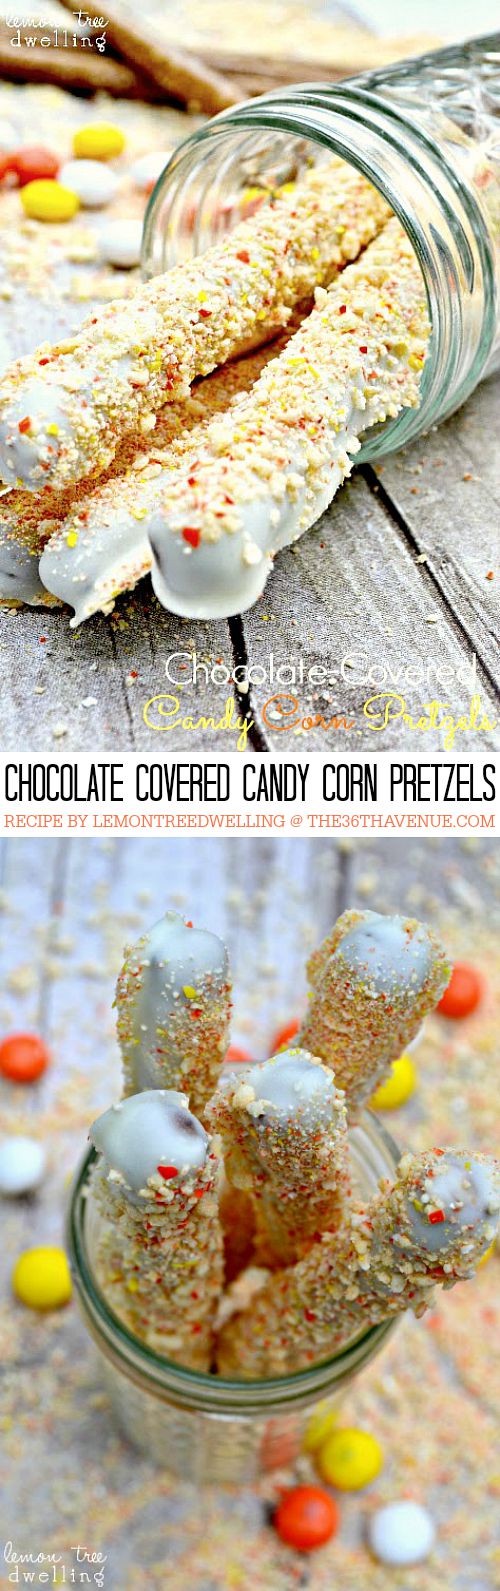 Recipes - Chocolate Covered Candy Corn Pretzels... The perfect Fall treat!